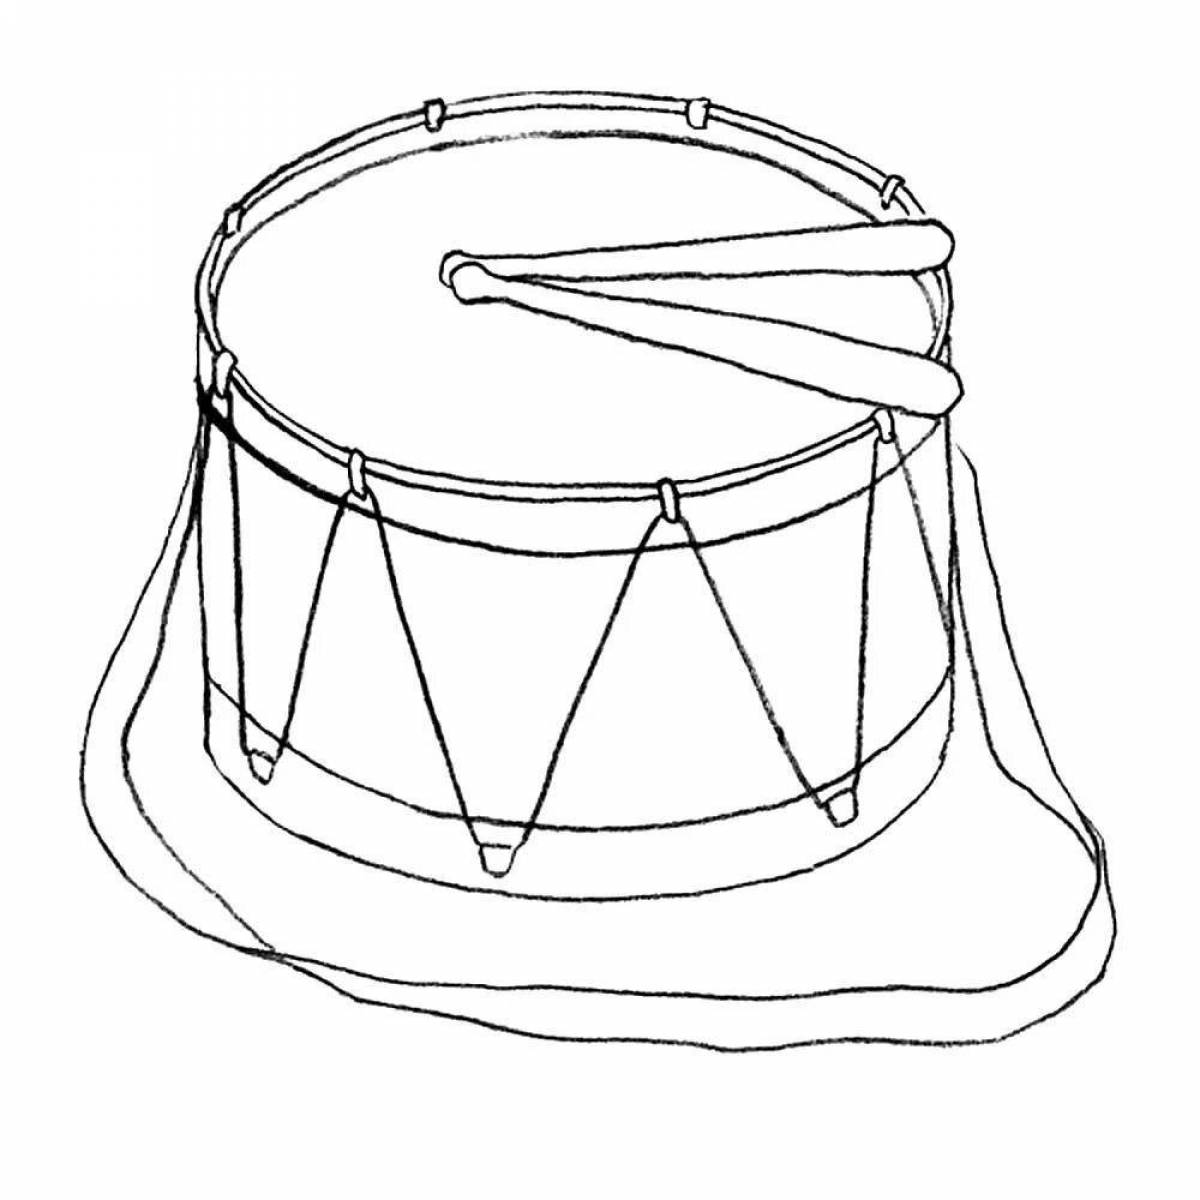 Tempting drum coloring page